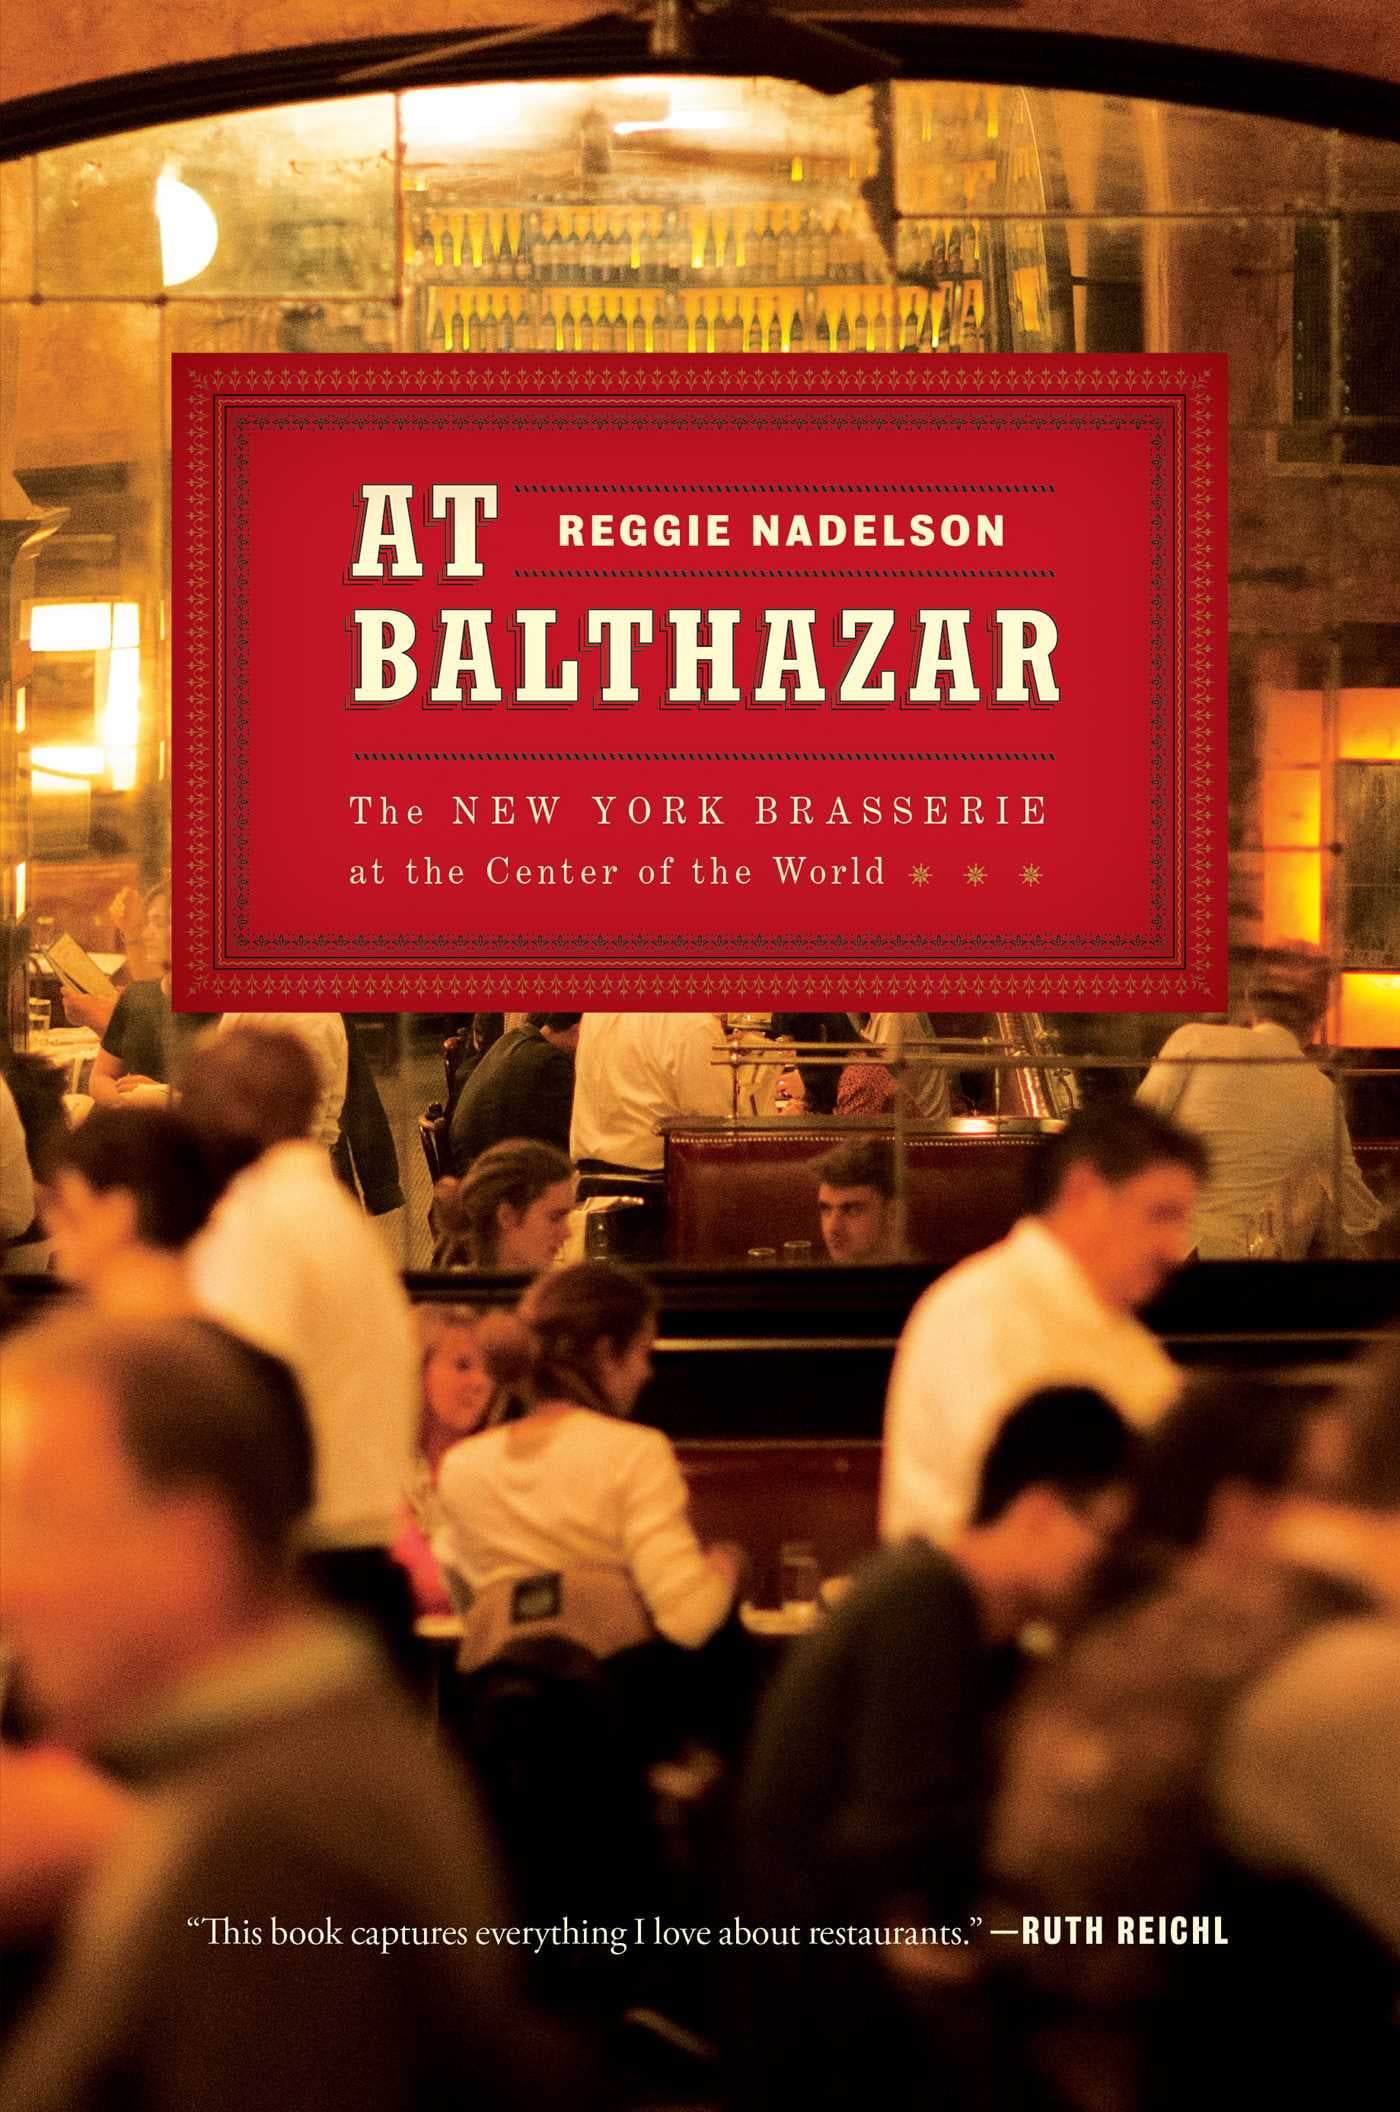 At-Balthazar-The-New-York-Brasserie-at-the-Center-of-the-World